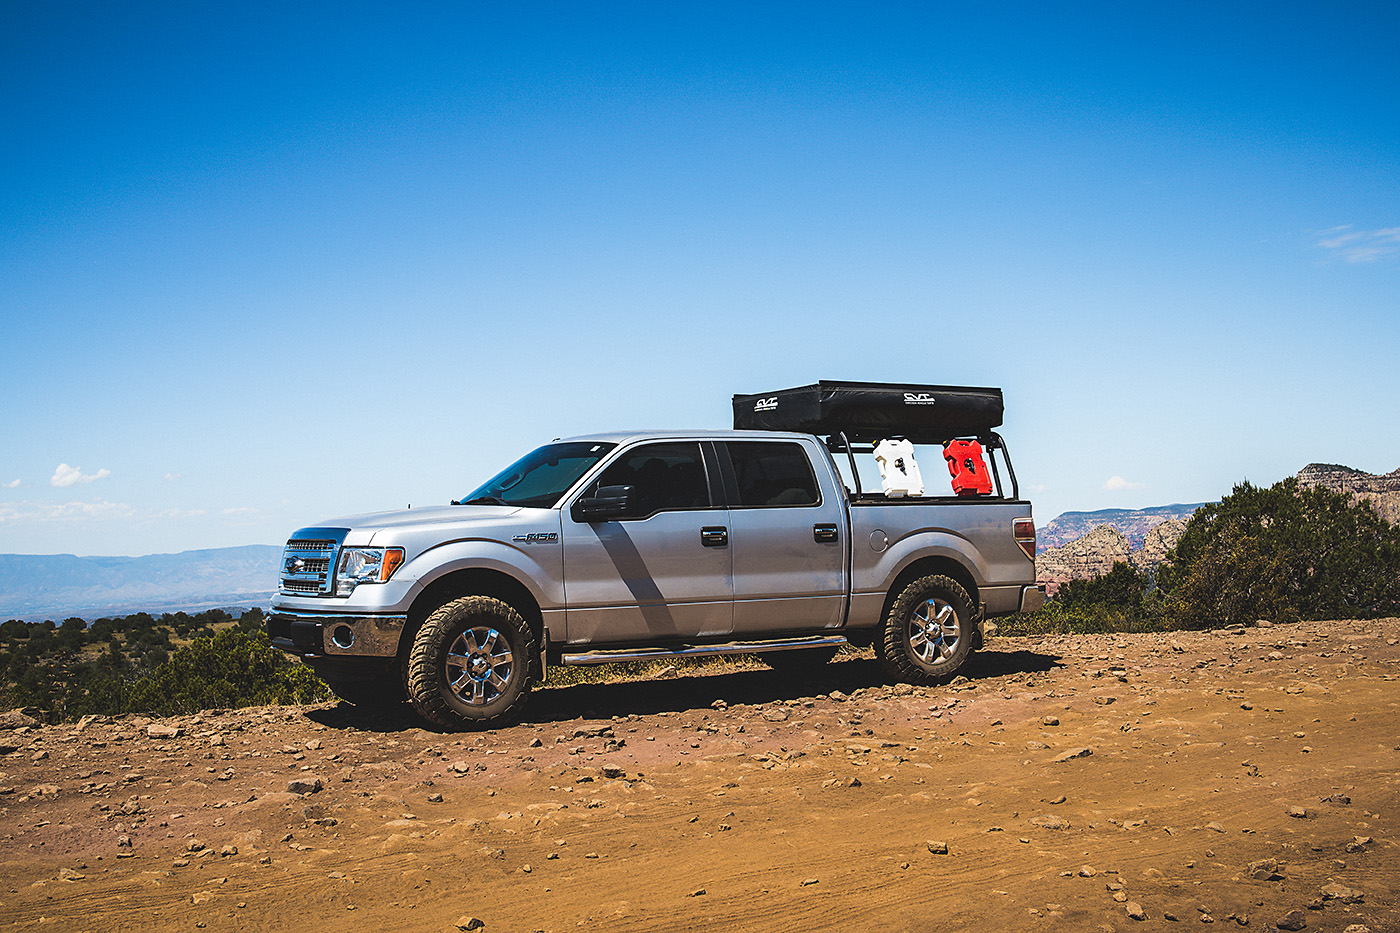 Our Overlanding Truck – 2014 F150